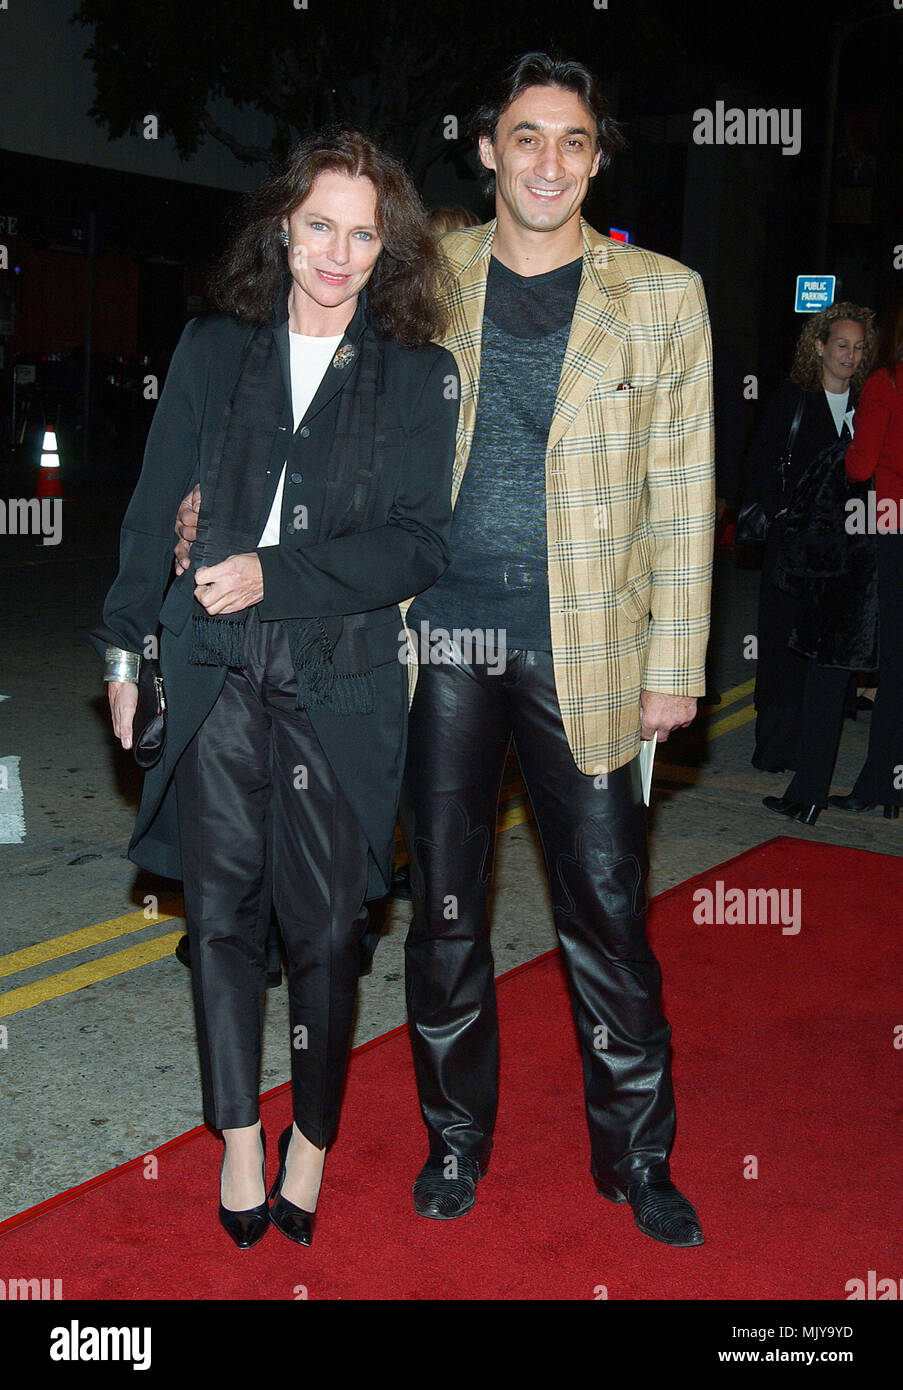 Jacqueline Bisset and Emin Boztepe arriving at the premiere of 'Confessions Of A Dangerous Mind' at the Bruin Theatre in Los Angeles. December 11, 2002.          -            BissettJacq BoztepeEmin19.JPG           -              BissettJacq BoztepeEmin19.JPGBissettJacq BoztepeEmin19  Event in Hollywood Life - California,  Red Carpet Event, Vertical, USA, Film Industry, Celebrities,  Photography, Bestof, Arts Culture and Entertainment, Topix Celebrities fashion /  from the Red Carpet-, Vertical, Best of, Hollywood Life, Event in Hollywood Life - California,  Red Carpet , USA, Film Industry, Ce Stock Photo